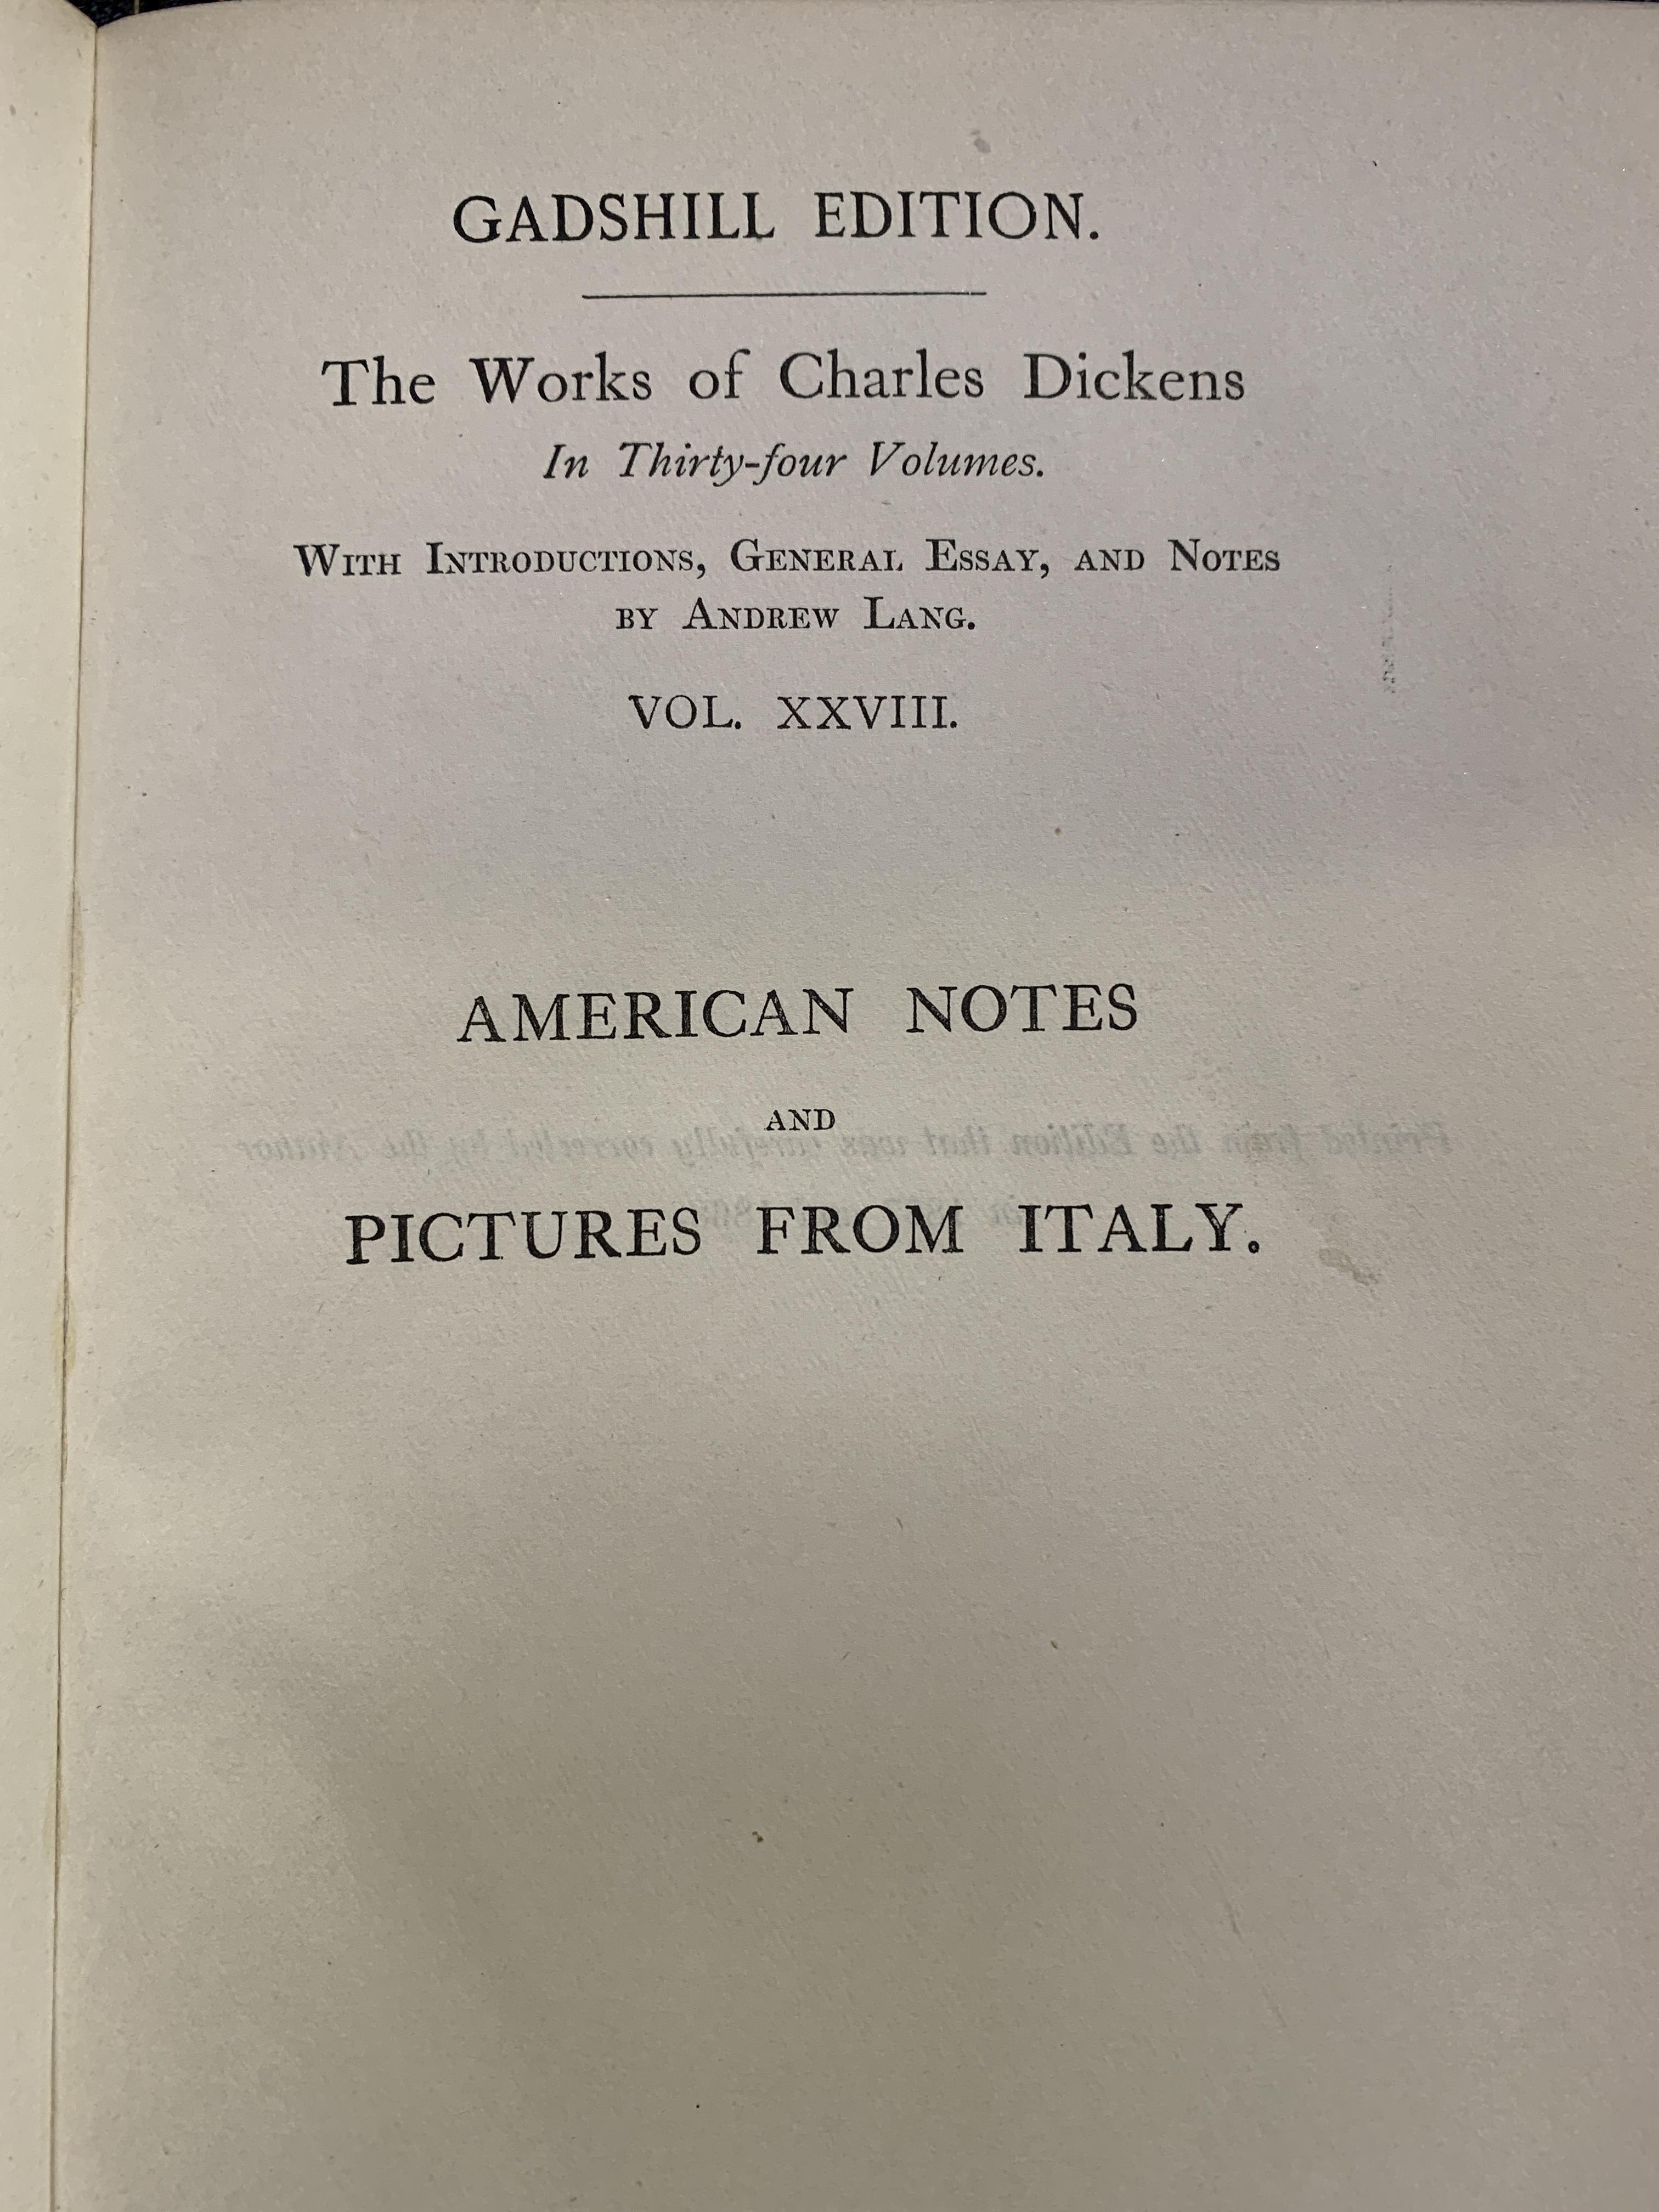 The Complete Works of Charles Dickens - Image 5 of 5